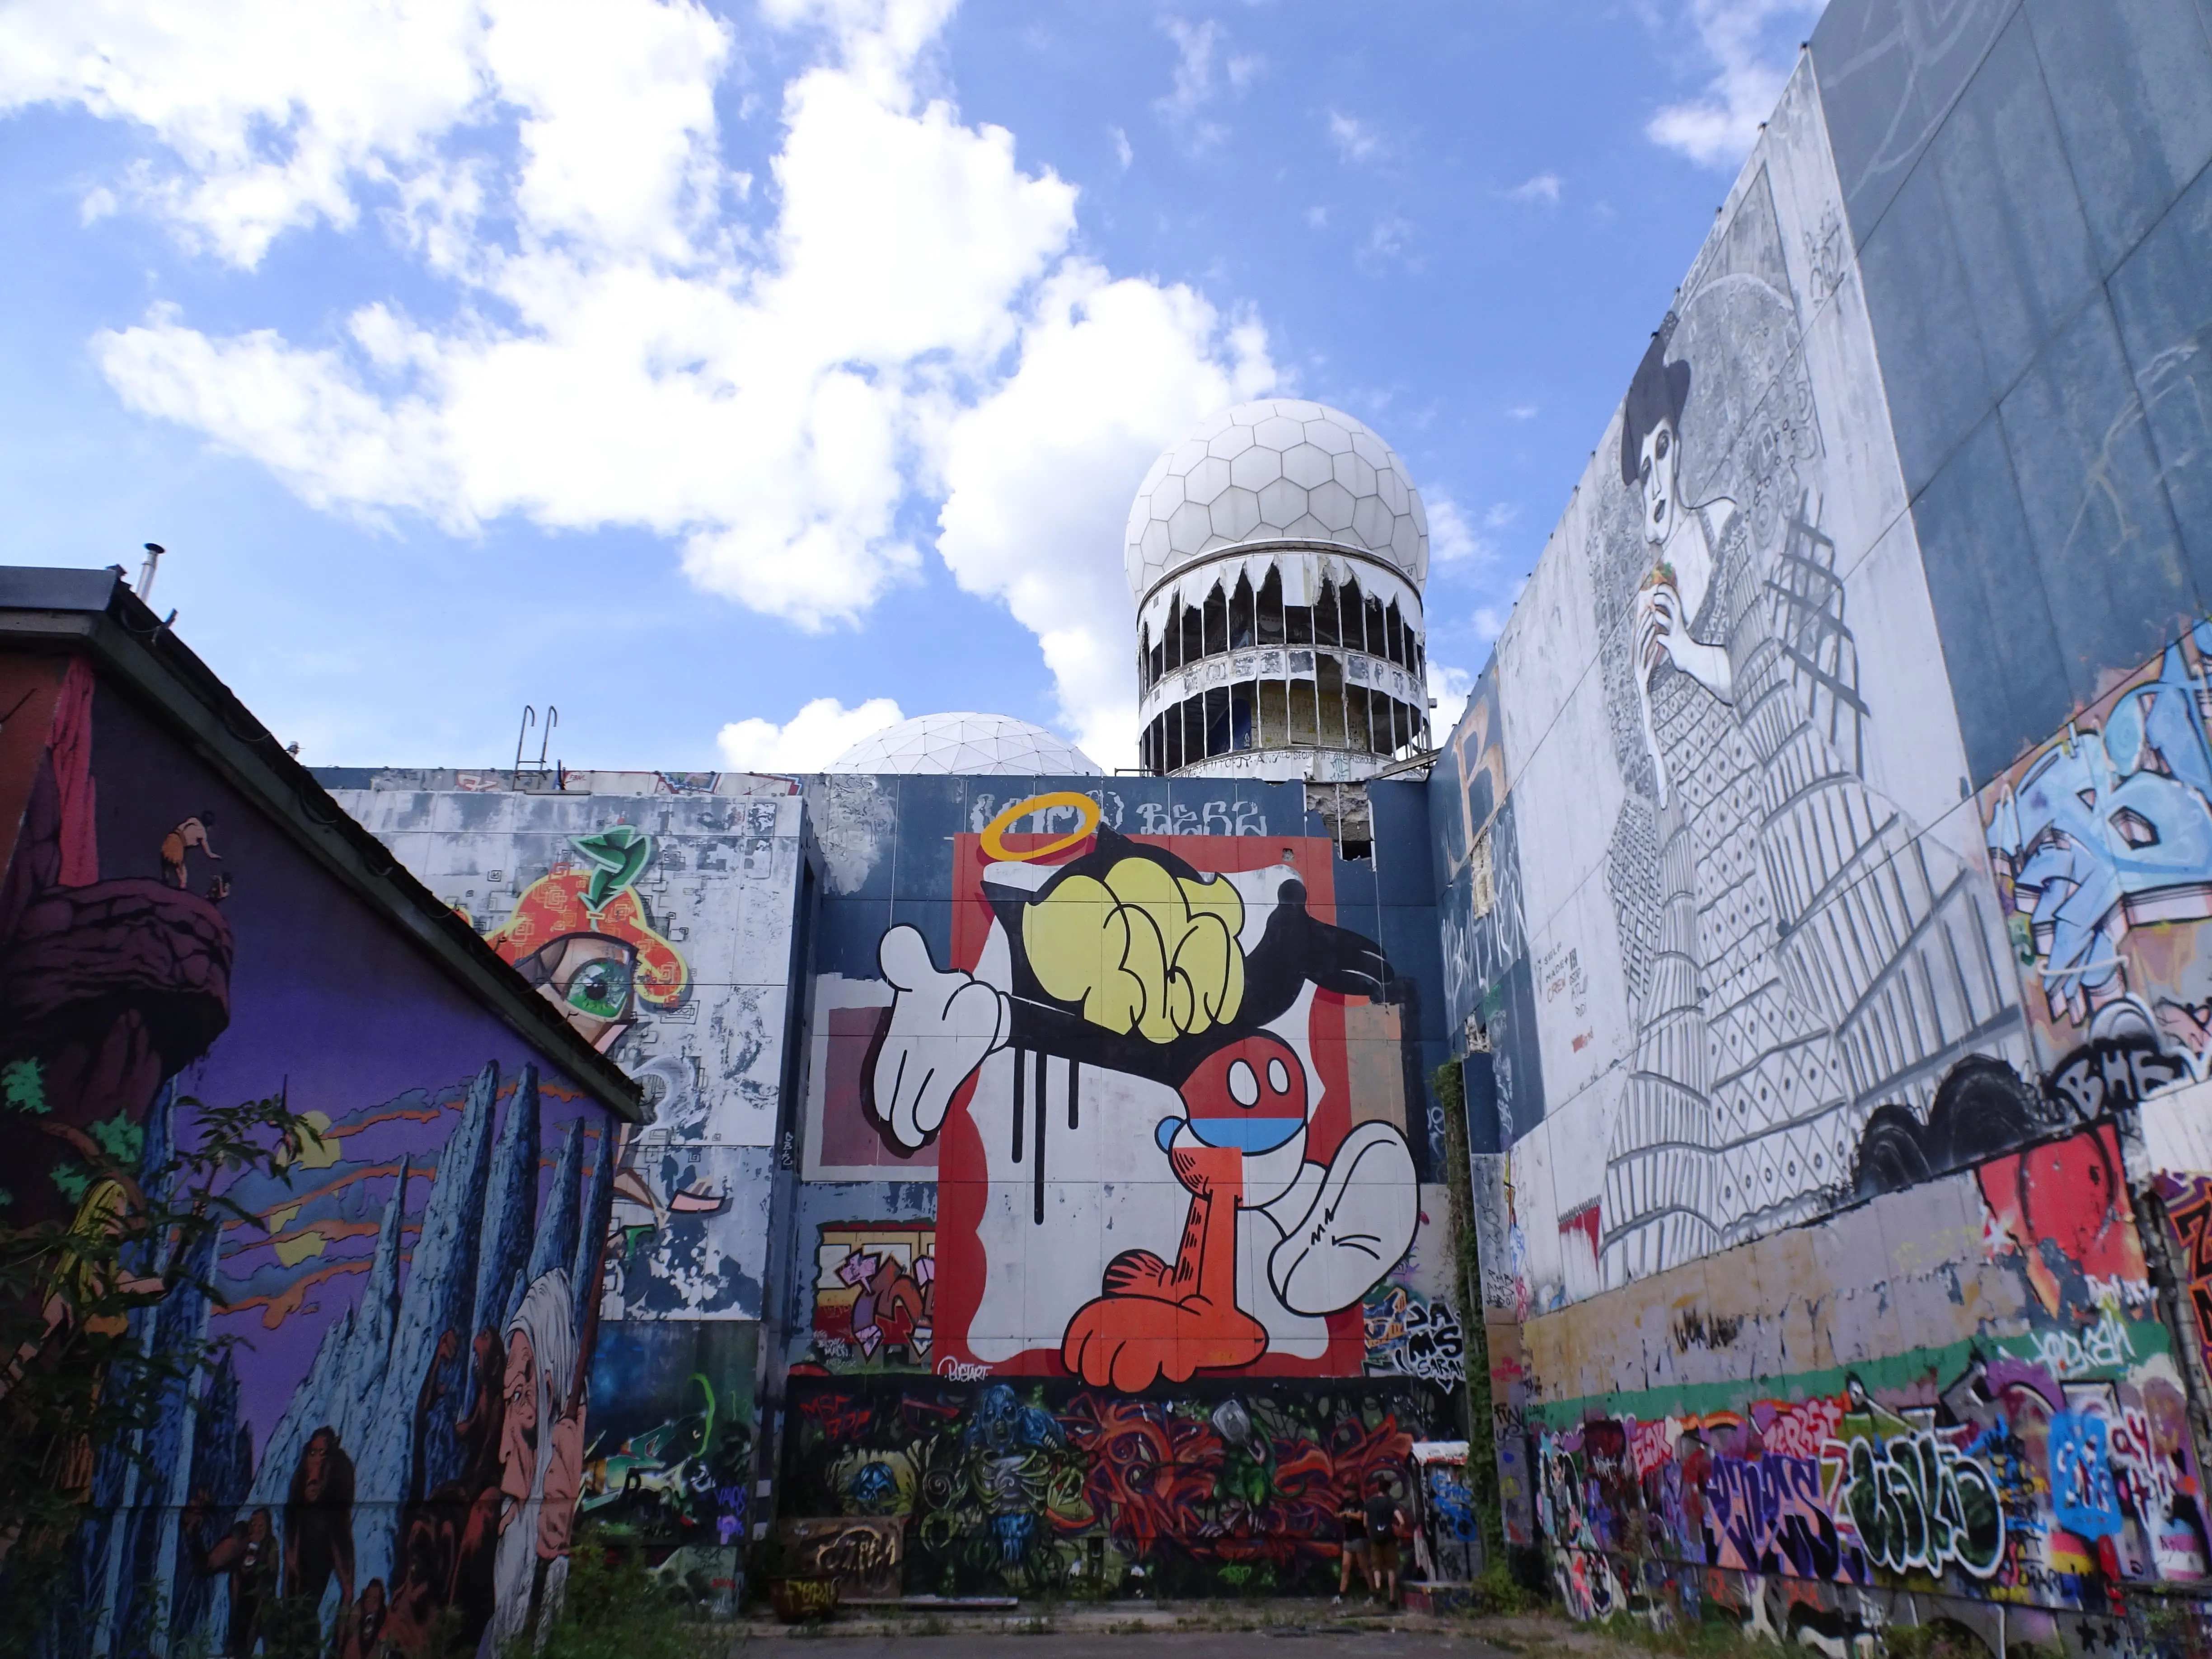 A domed building over a wall covered in graffiti